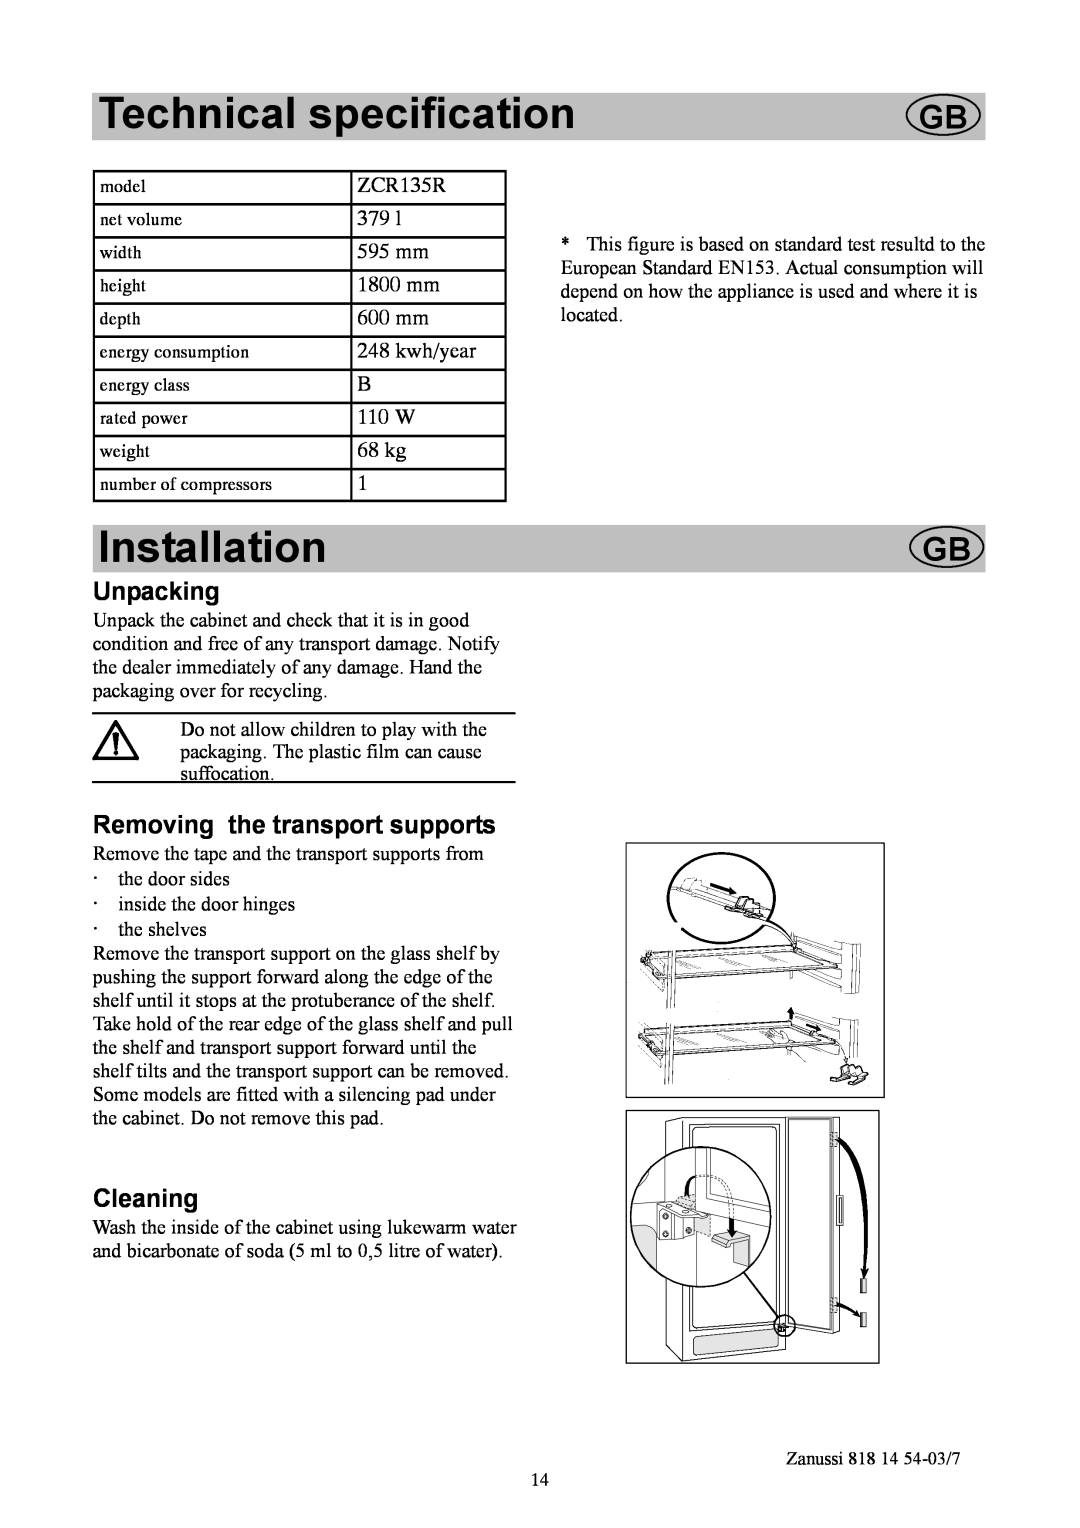 Zanussi ZCR135R Technical specification, Installation, Unpacking, Removing the transport supports, Cleaning, 379 l, 595 mm 